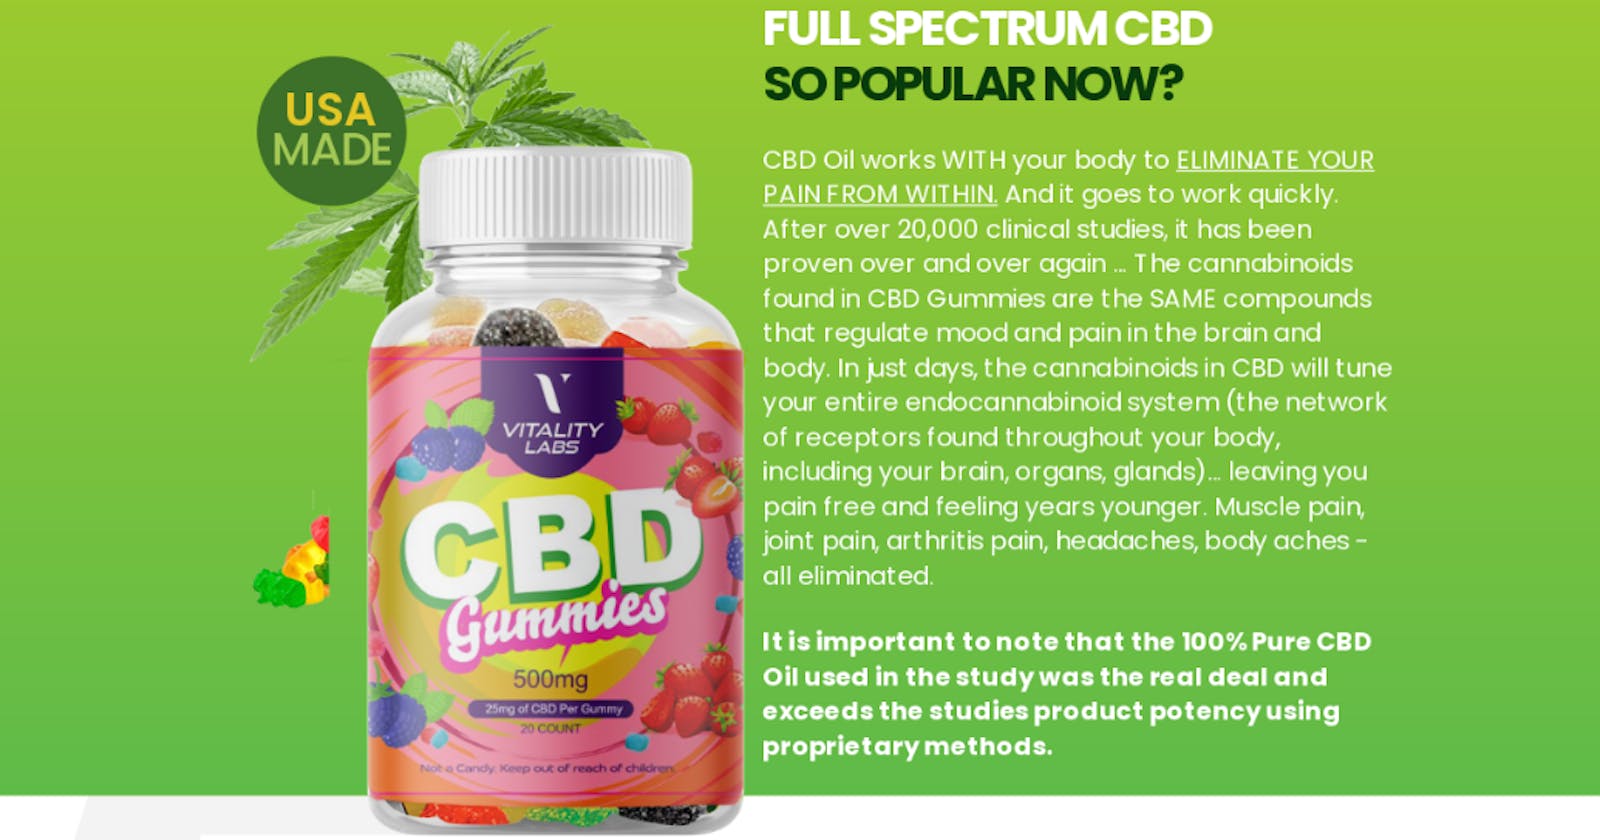 Vitality Labs CBD Gummies - Effective Product Good For You, Where To Buy!